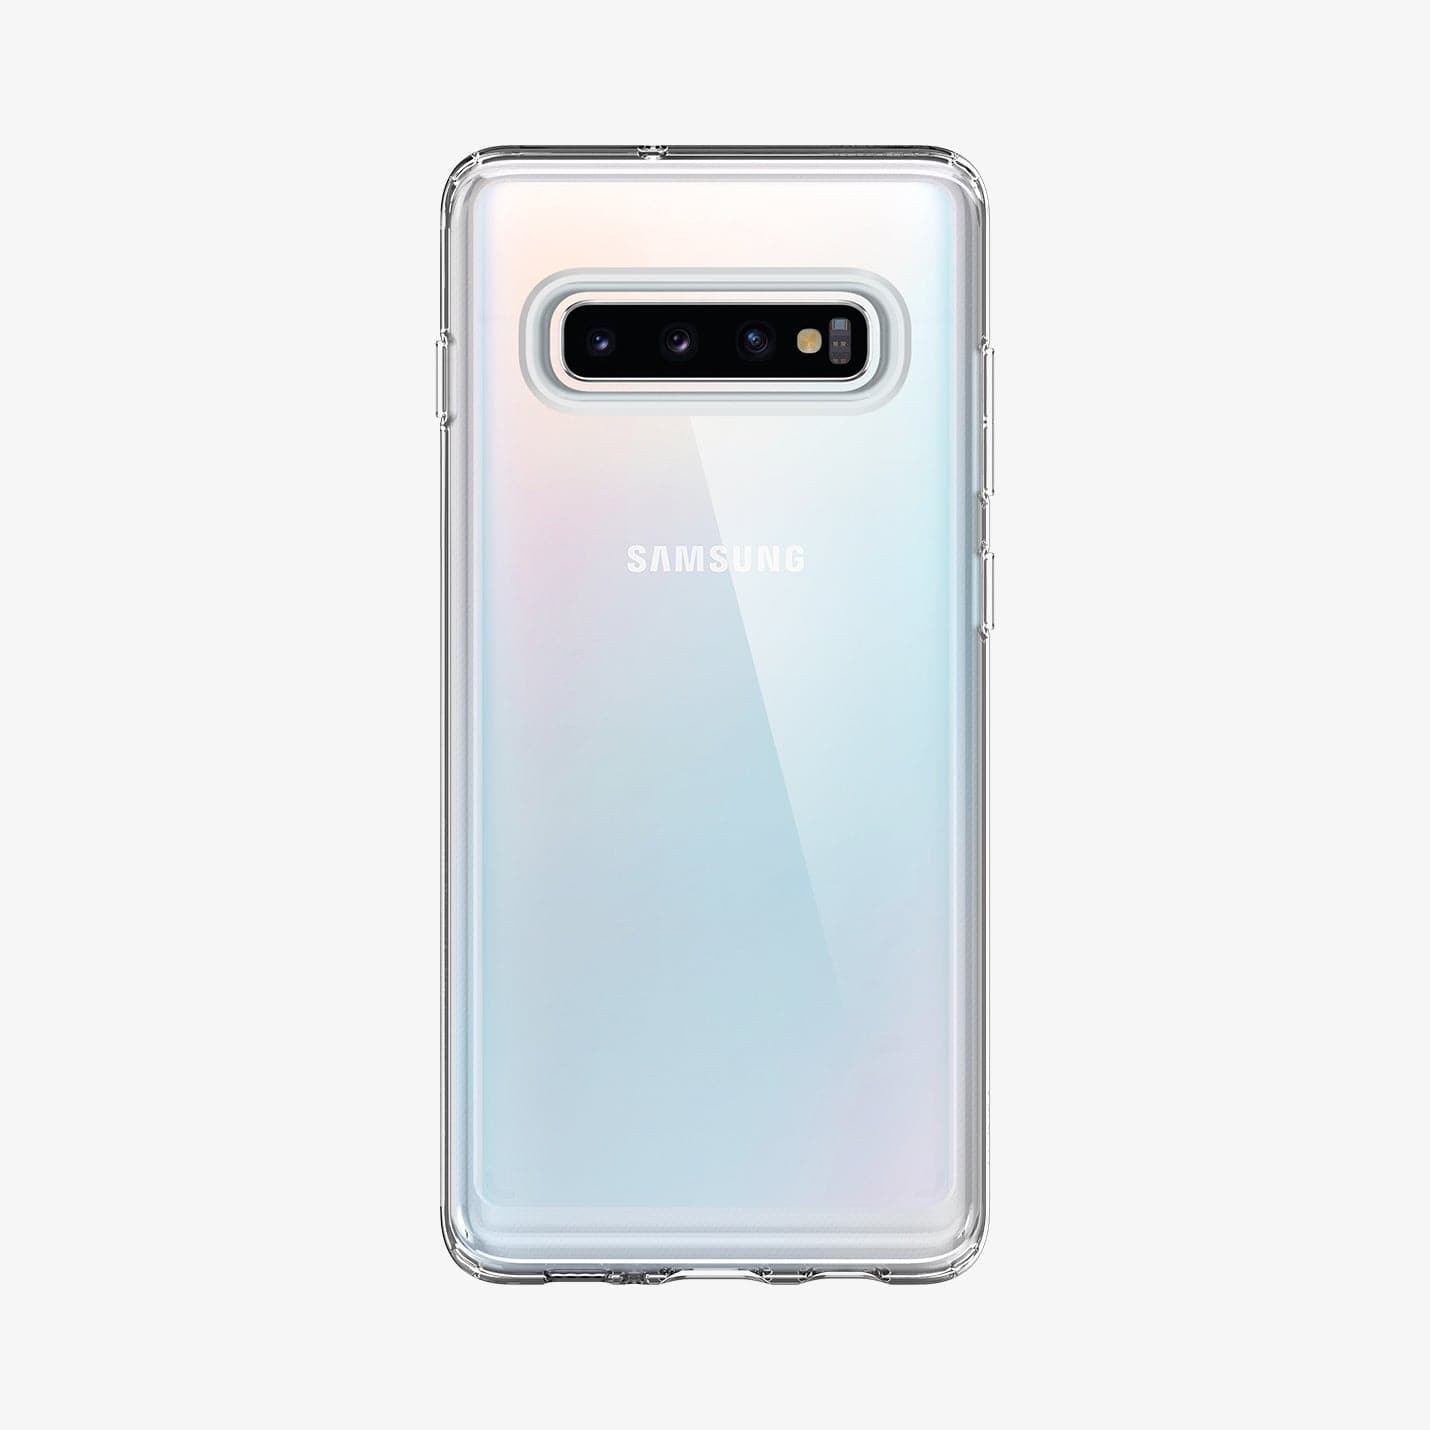 606CS25766 - Galaxy S10 Plus Ultra Hybrid Case in crystal clear showing the back